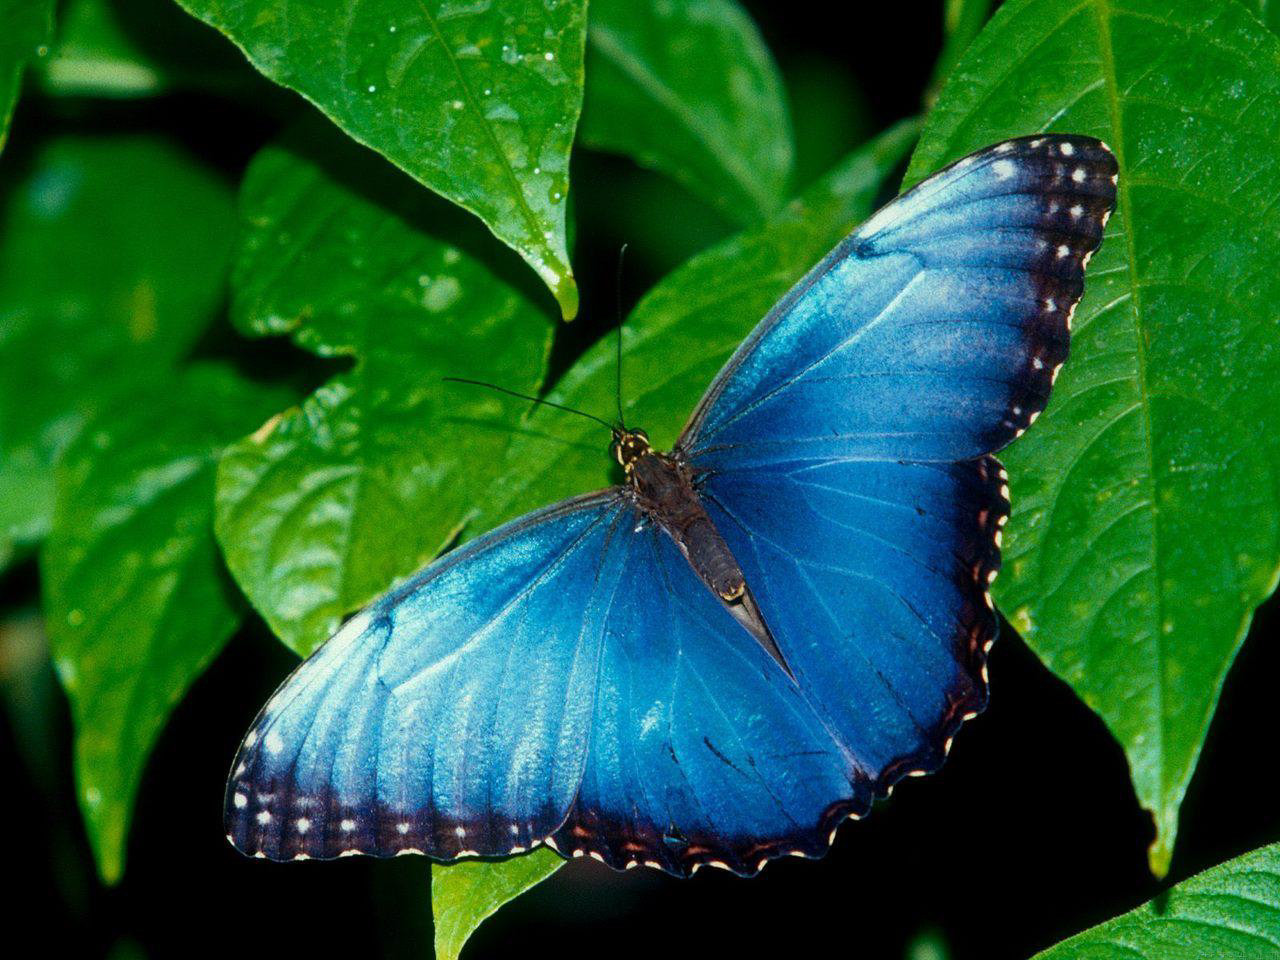 Wallpaper Of Blue Butterfly On The Green Leafe World